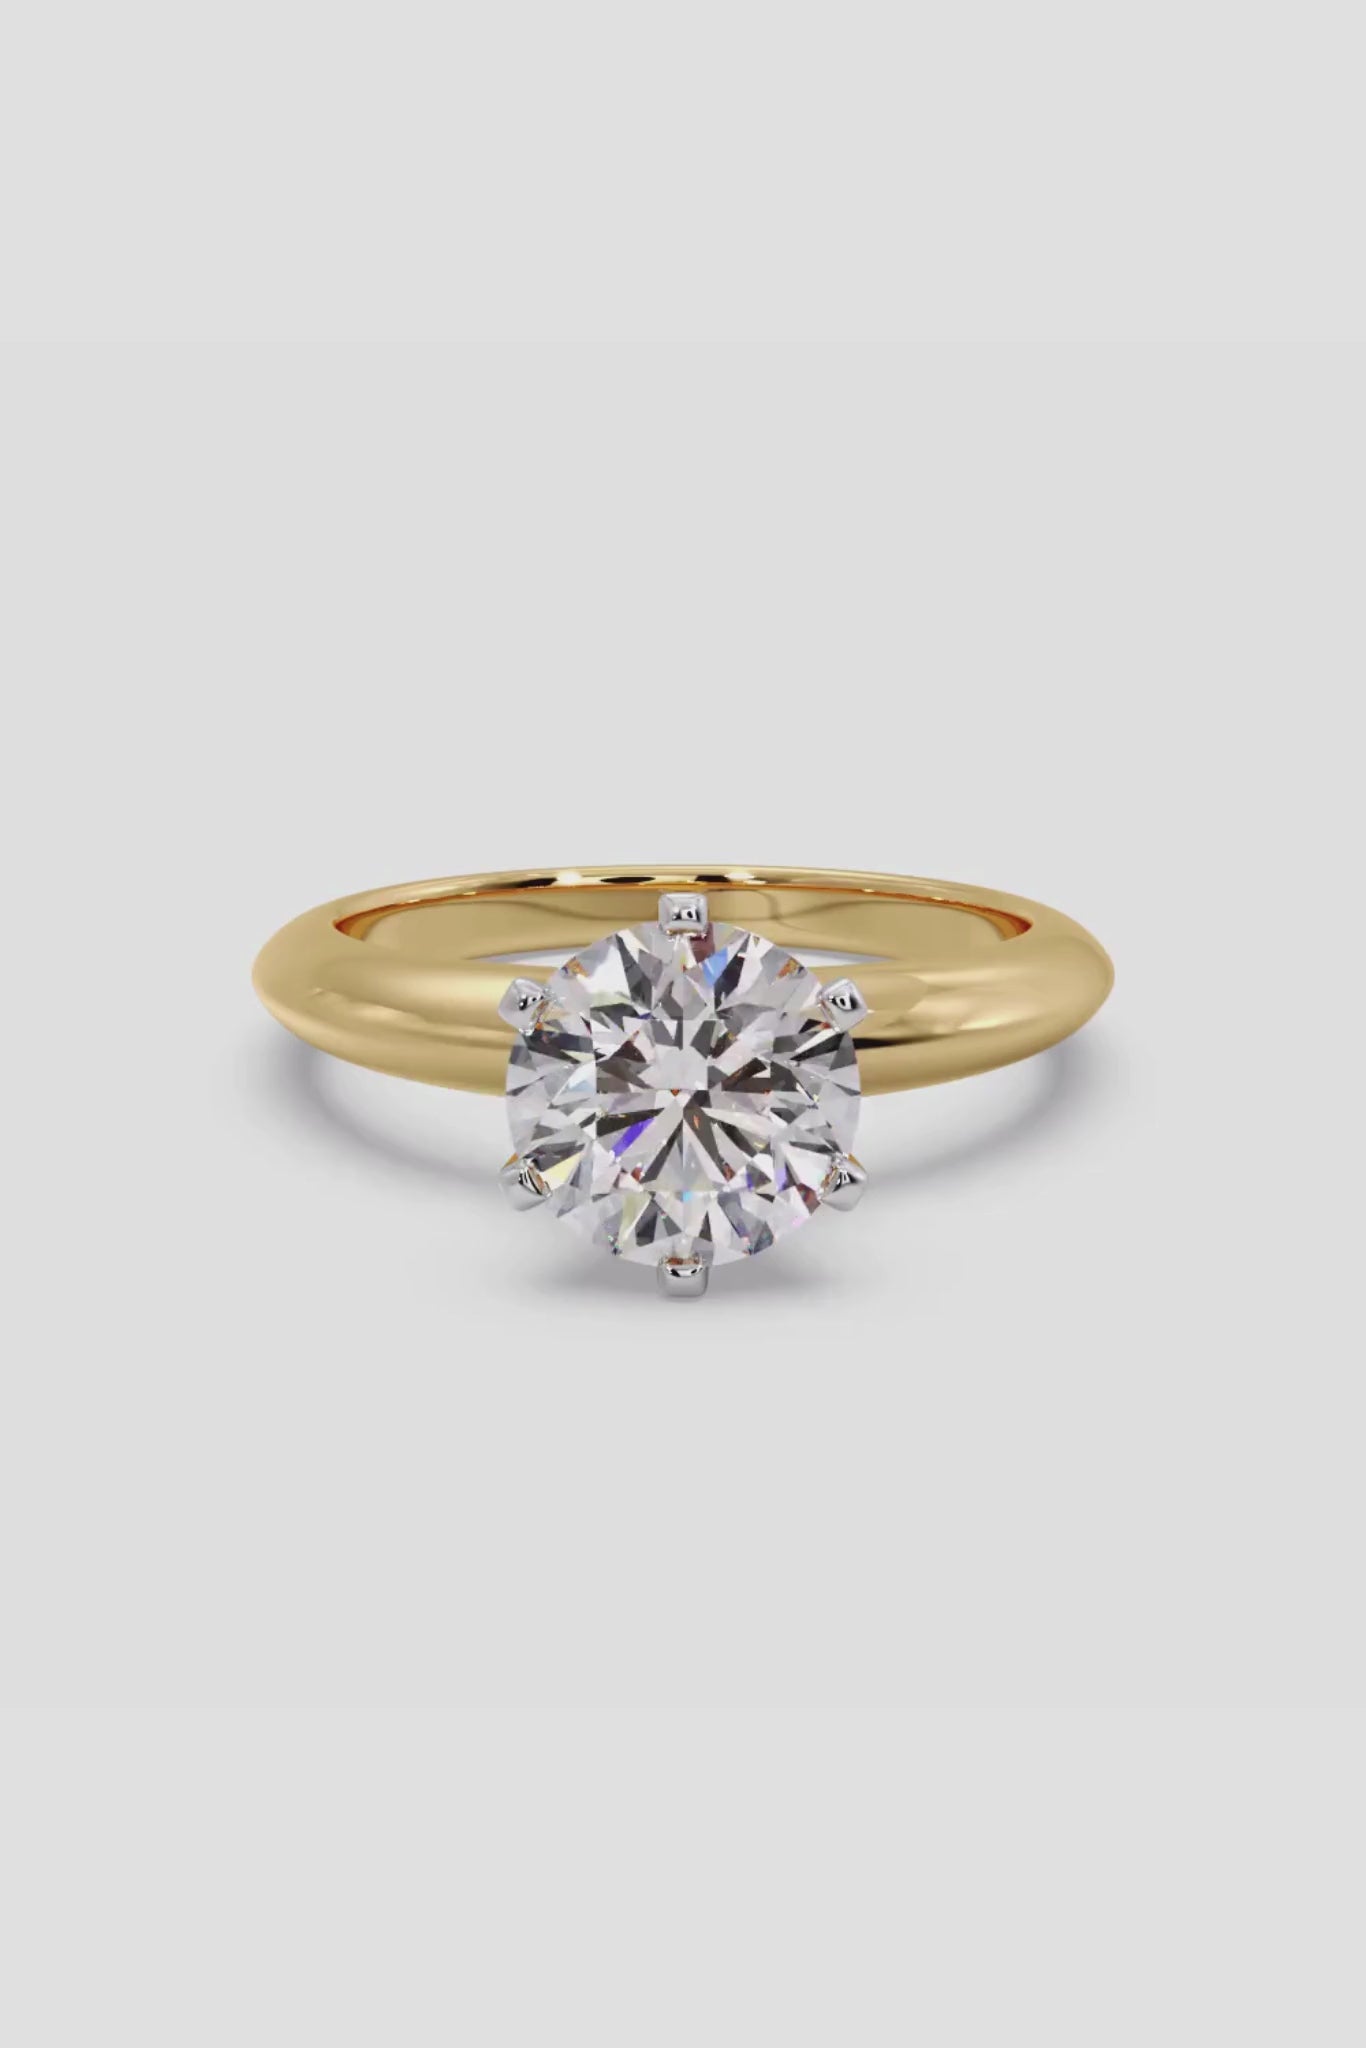 2 ct Six Prong Solitaire Ring